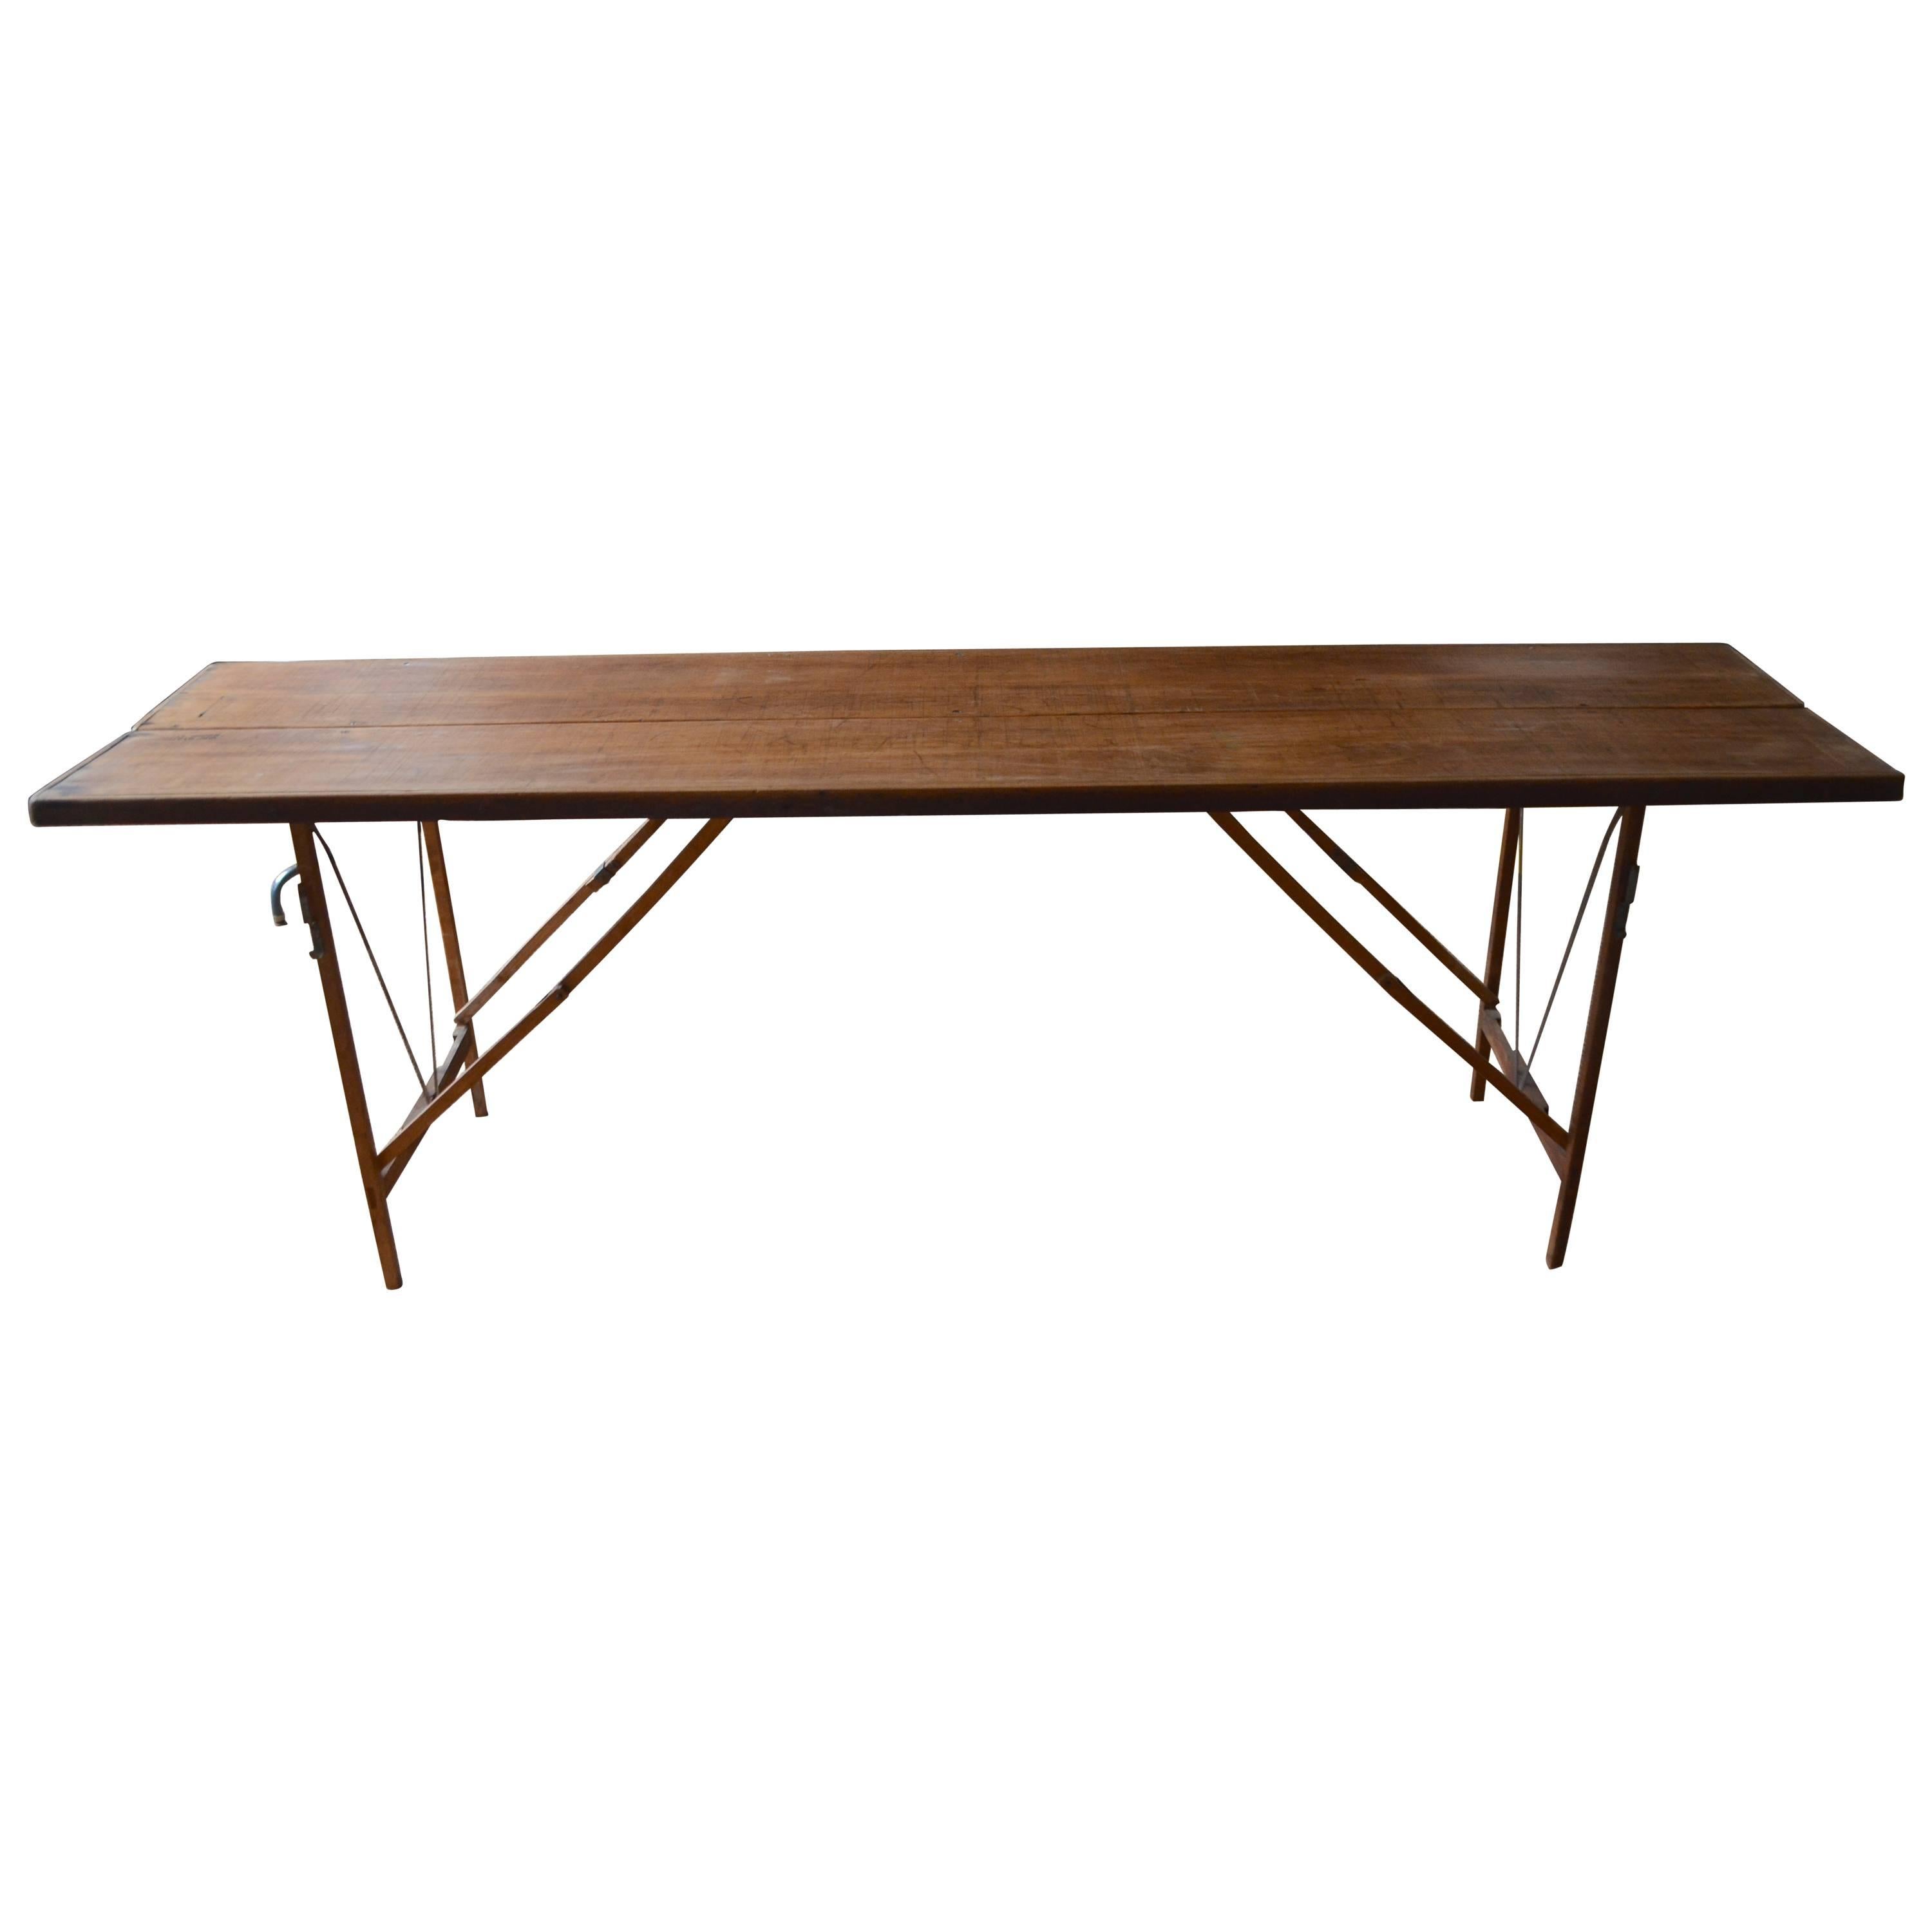 Folding Wooden Table Used by Wallpaper